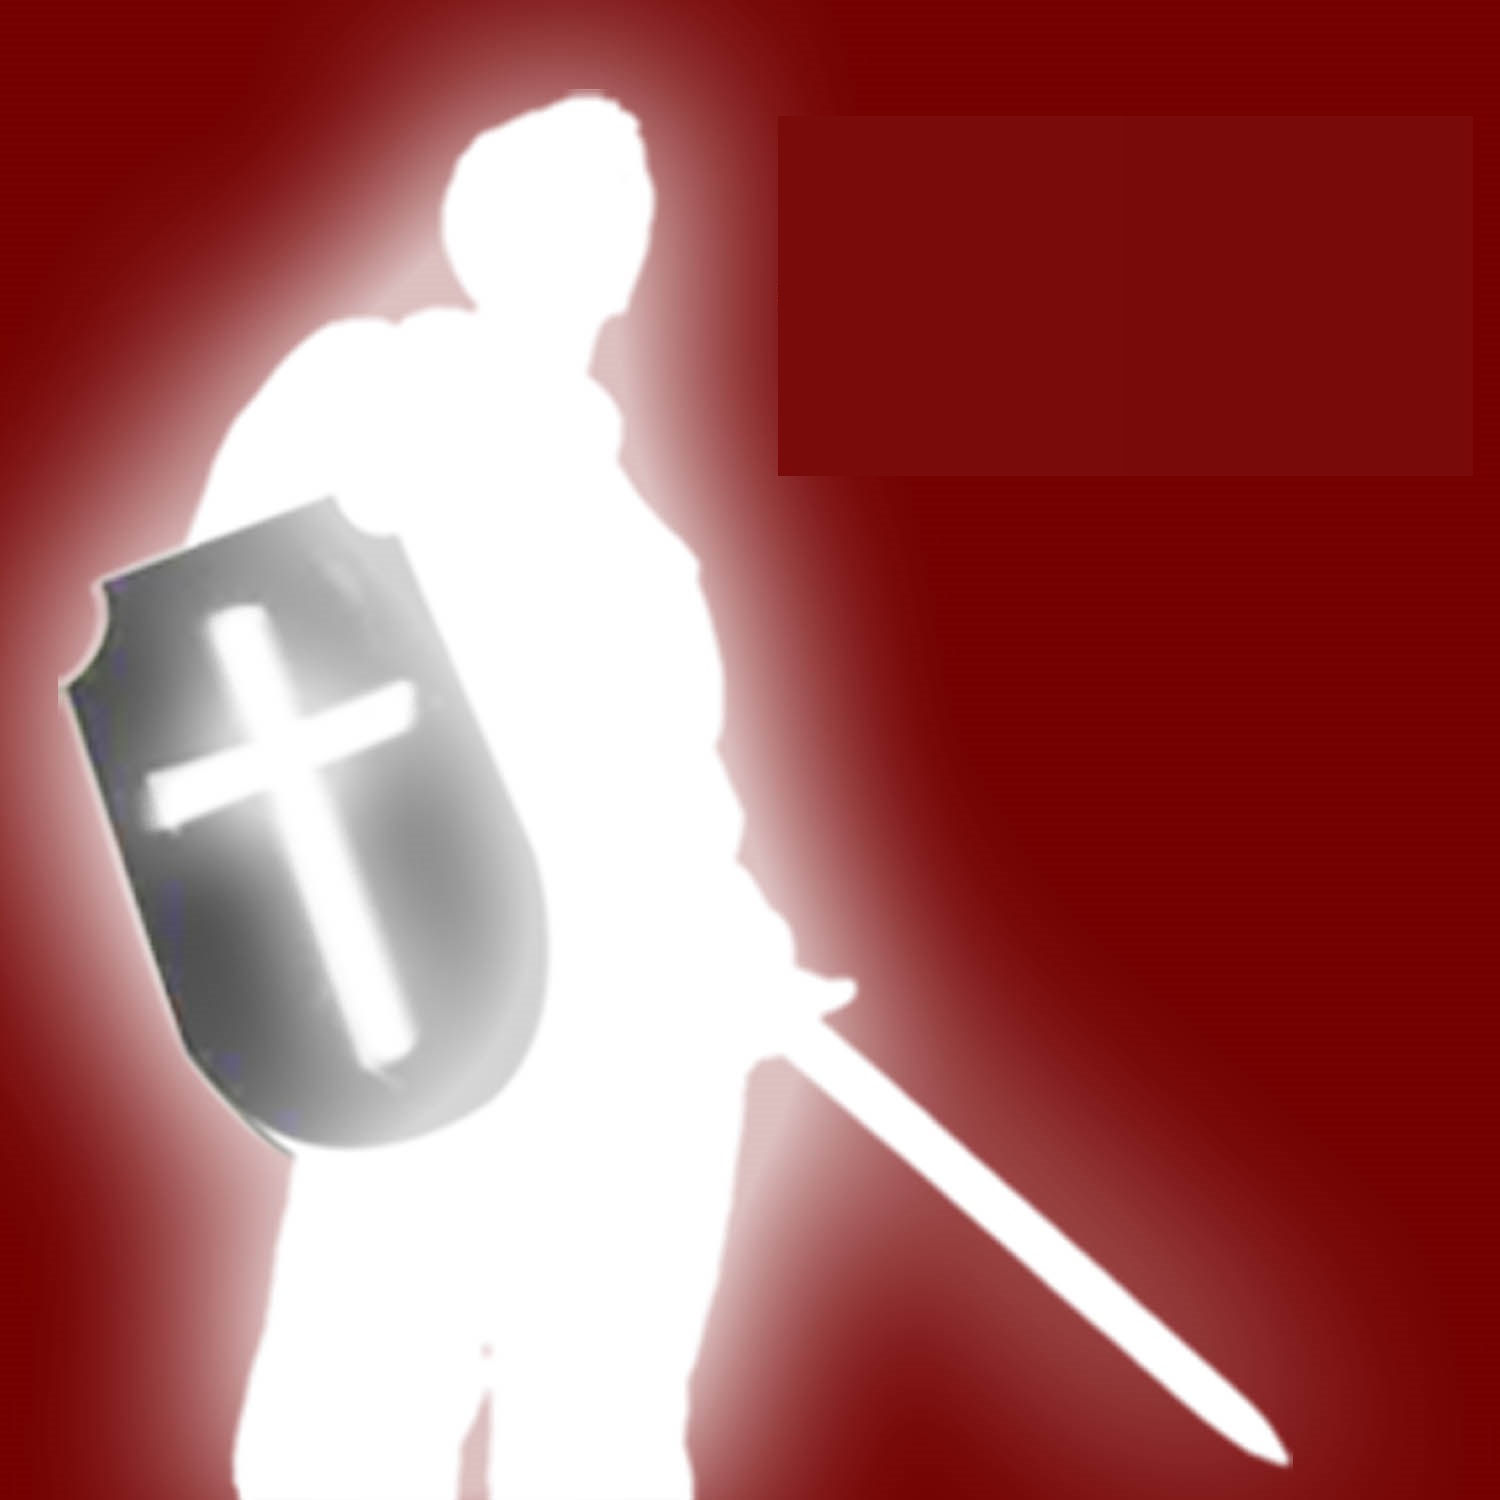 High Quality christian soldier Blank Meme Template